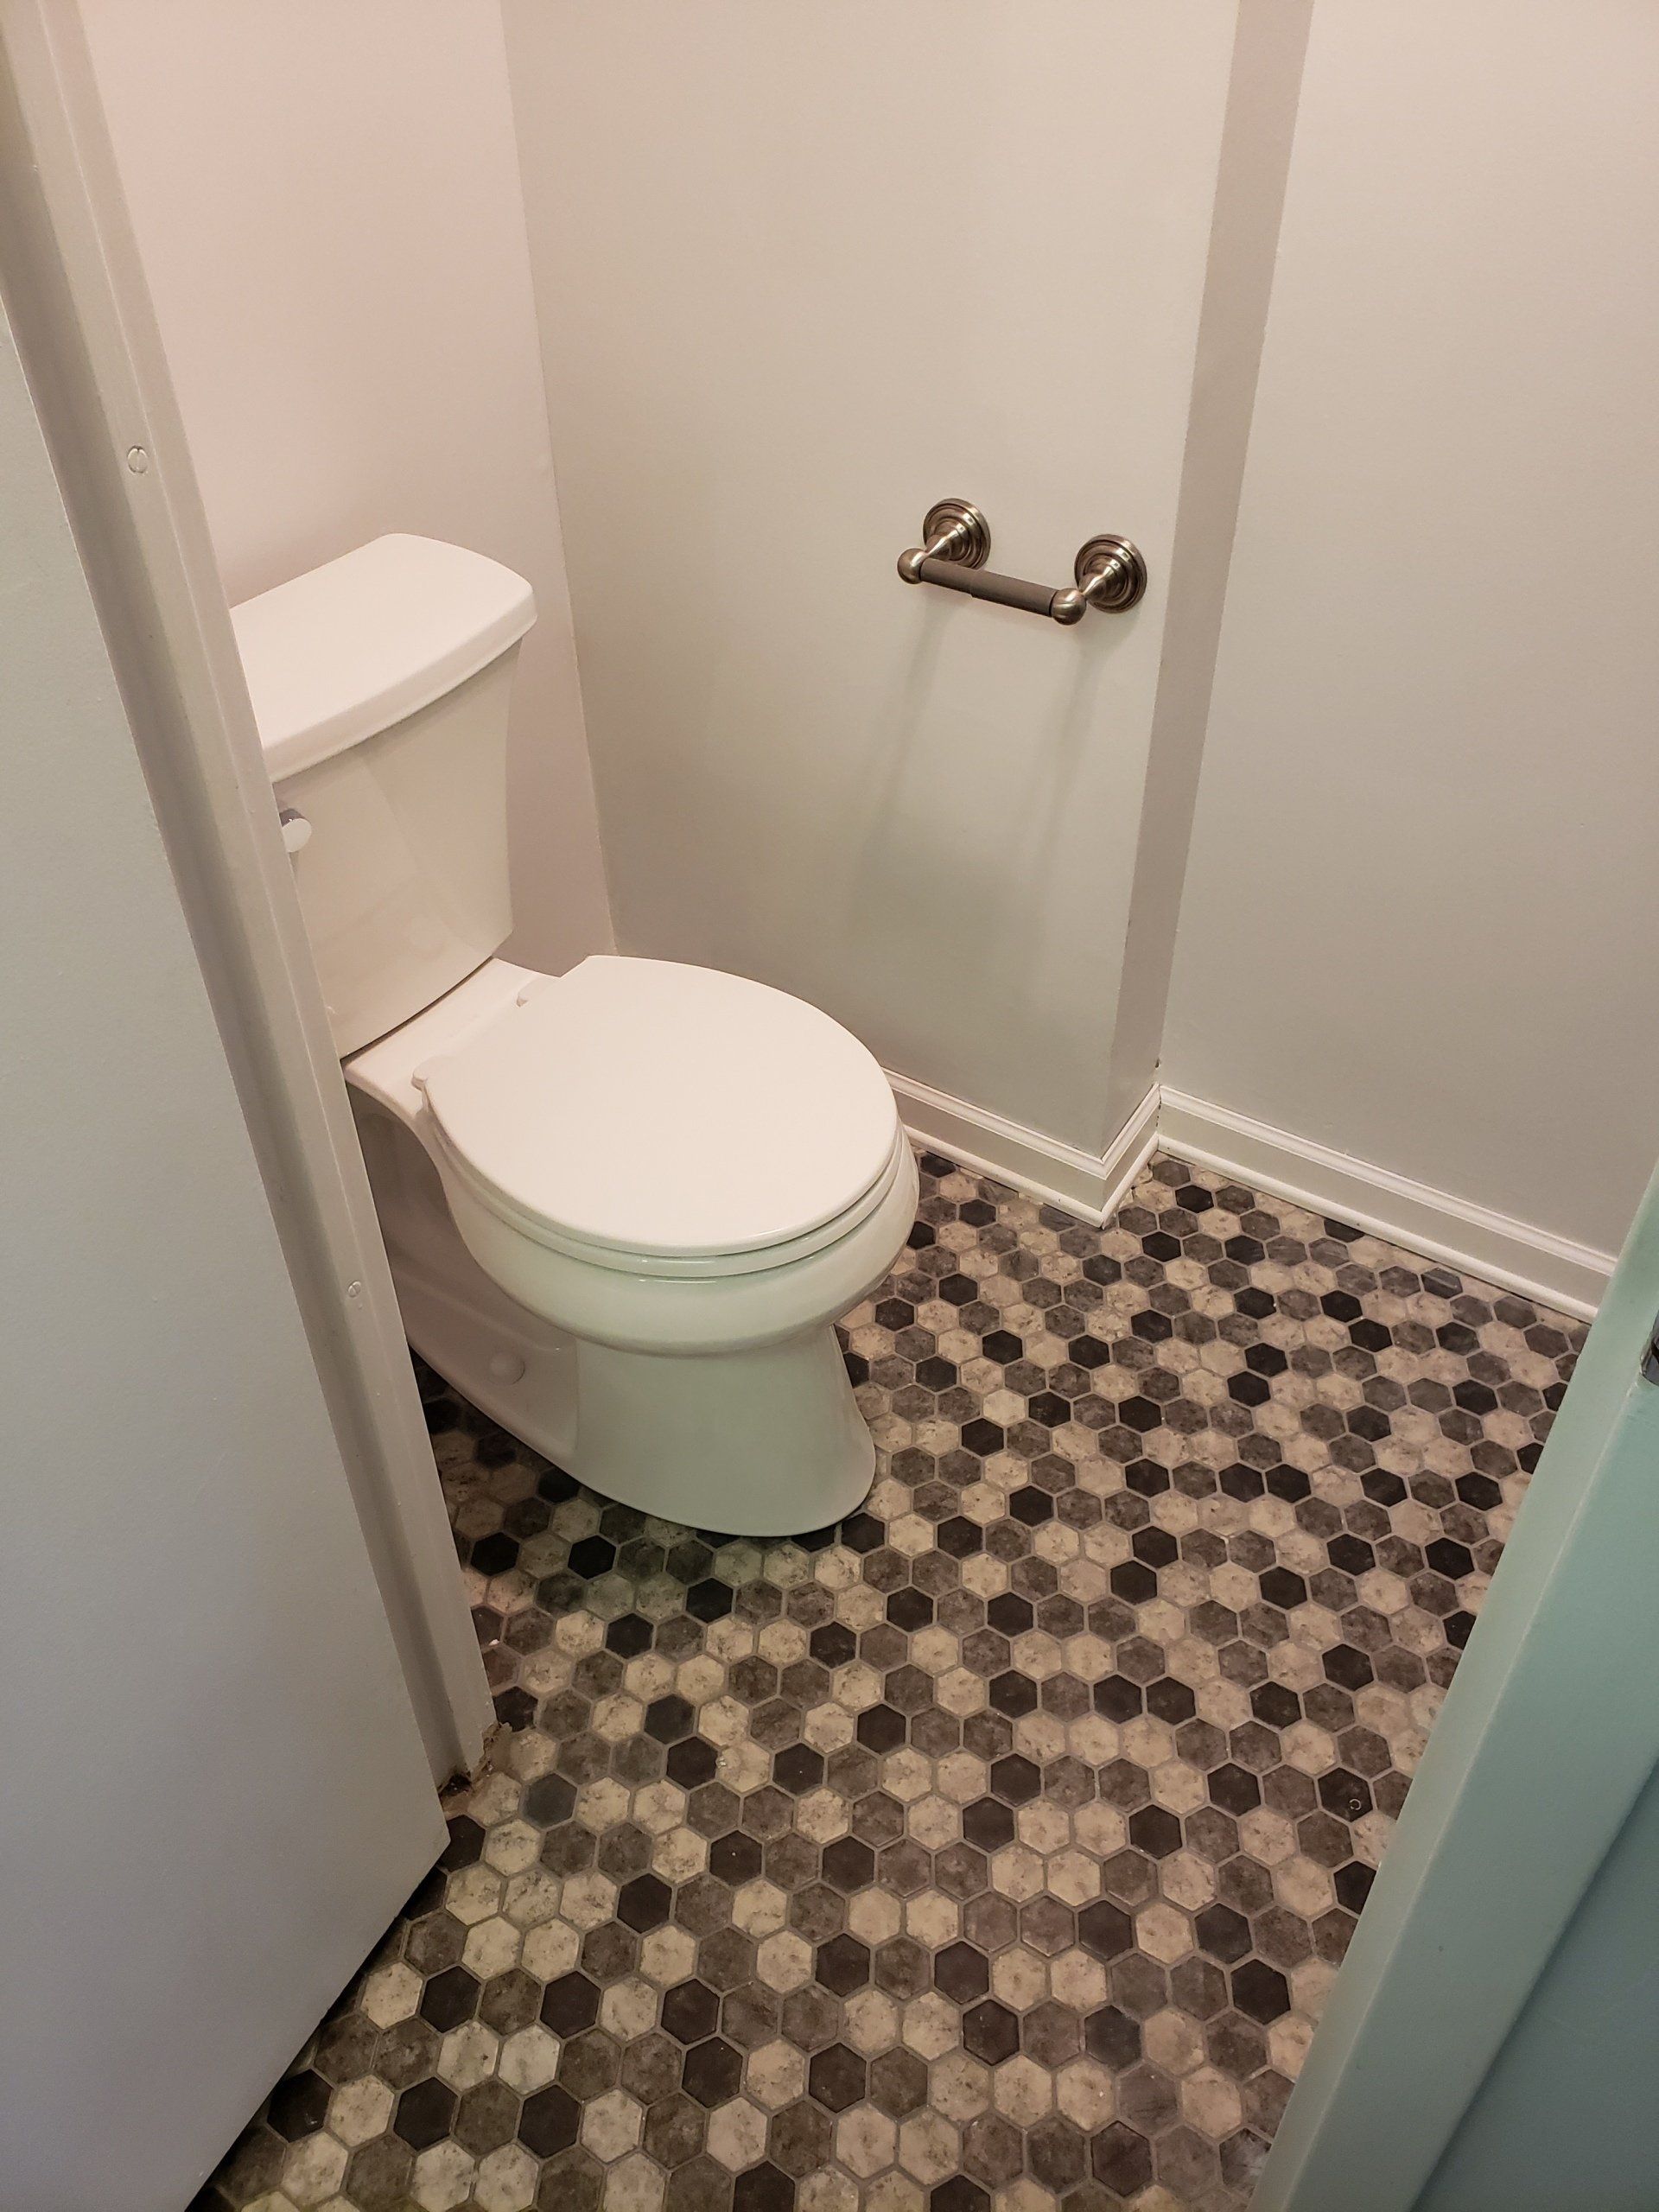 Jenkintown condo bathroom remodel close up of room with toilet and continuation of mosaic floor tiles.